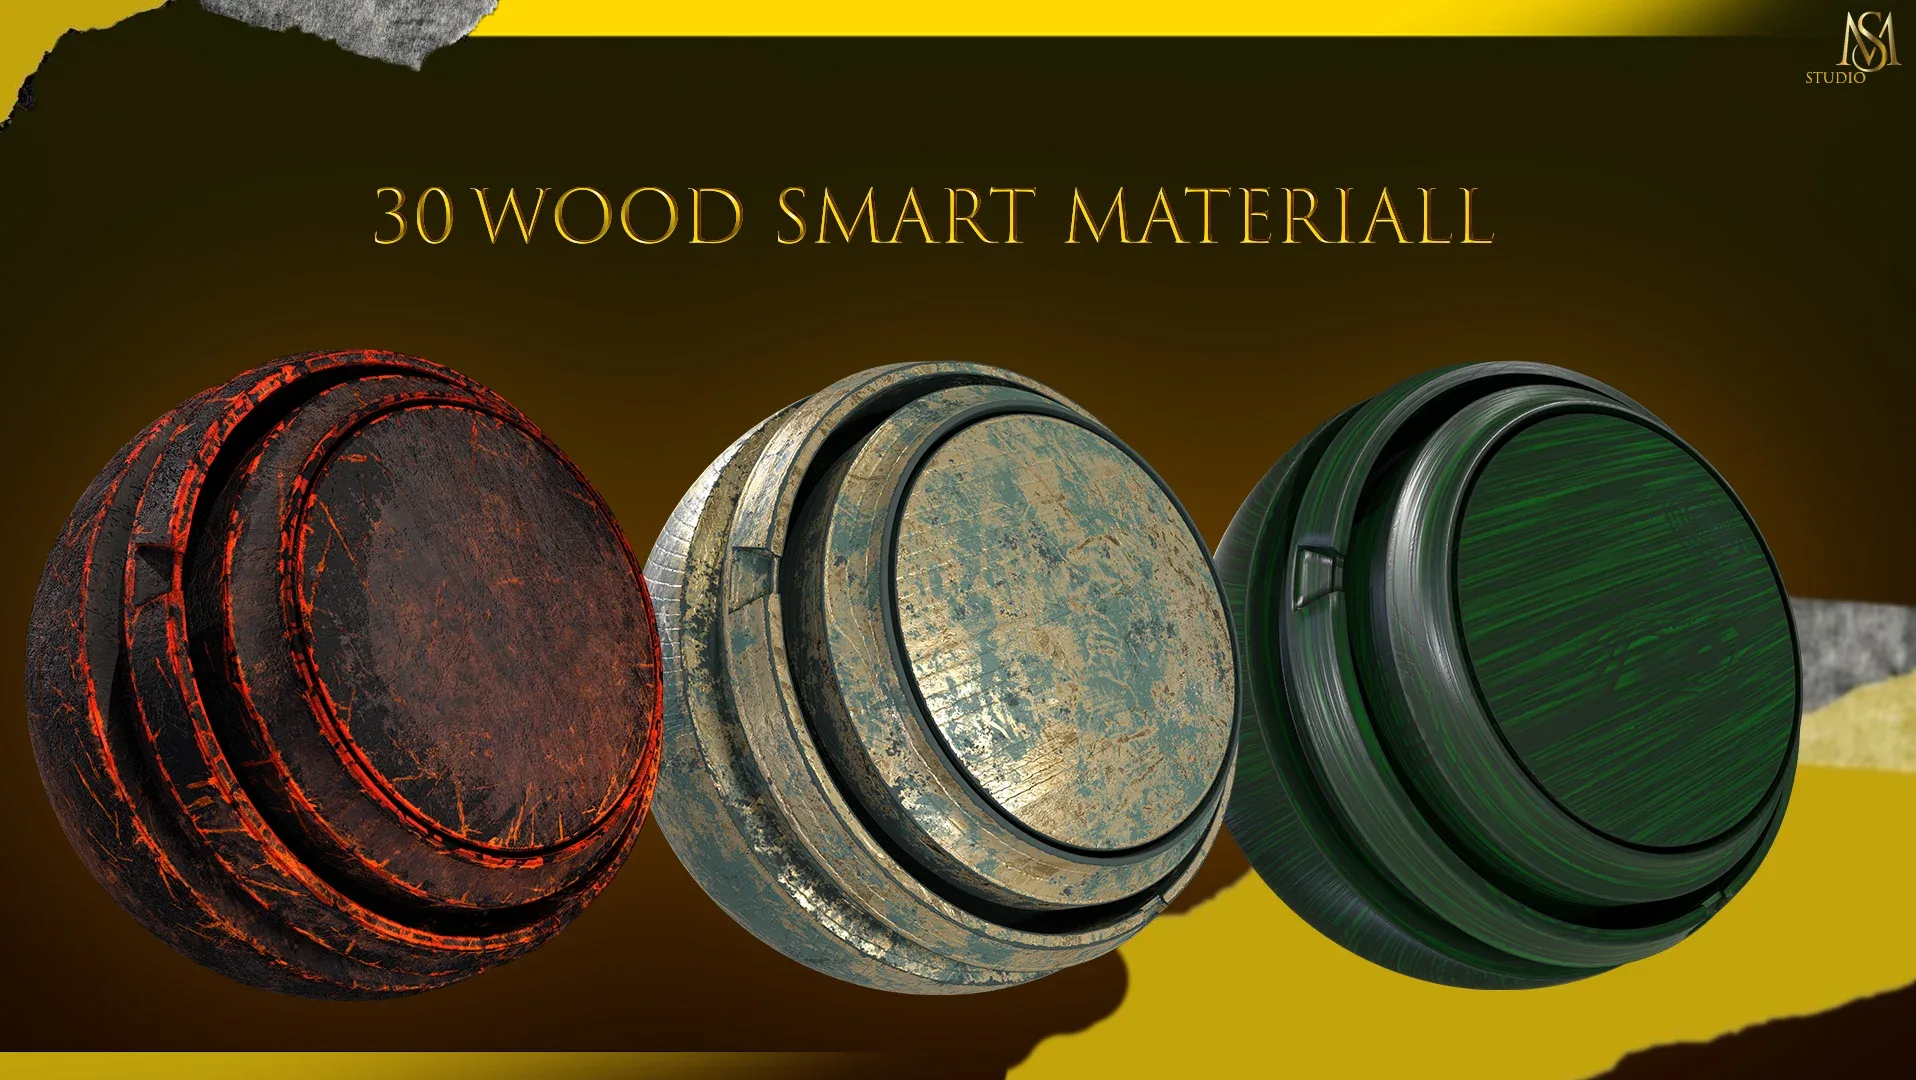 30 WOOD SMART MATERIAL & 8K PBR TEXURE